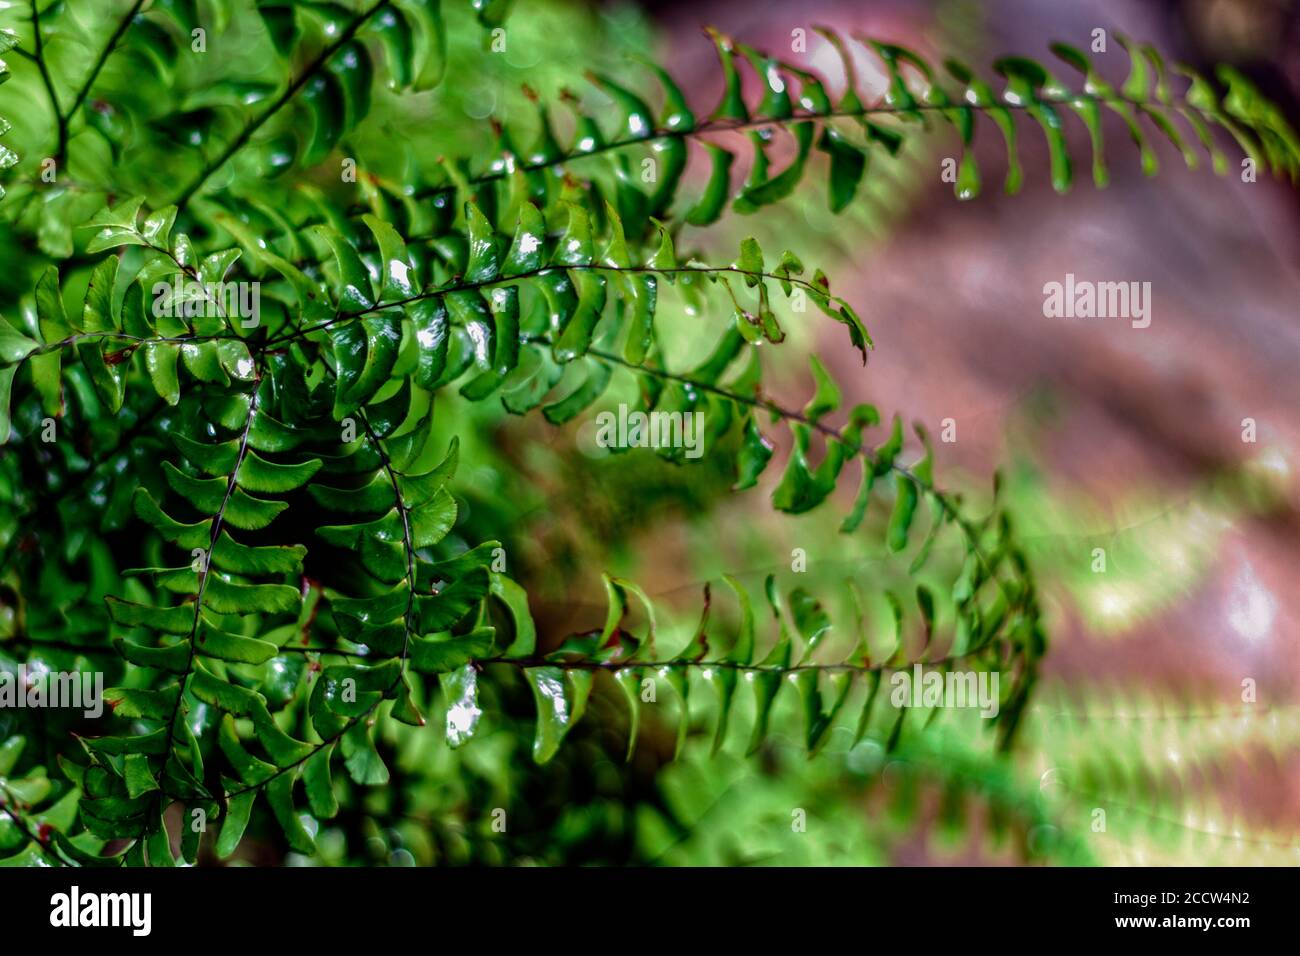 The Northern Maidenhair Fern's (Adiantum pedatum) fronds spiral from its center, creating a lacy pattern Stock Photo